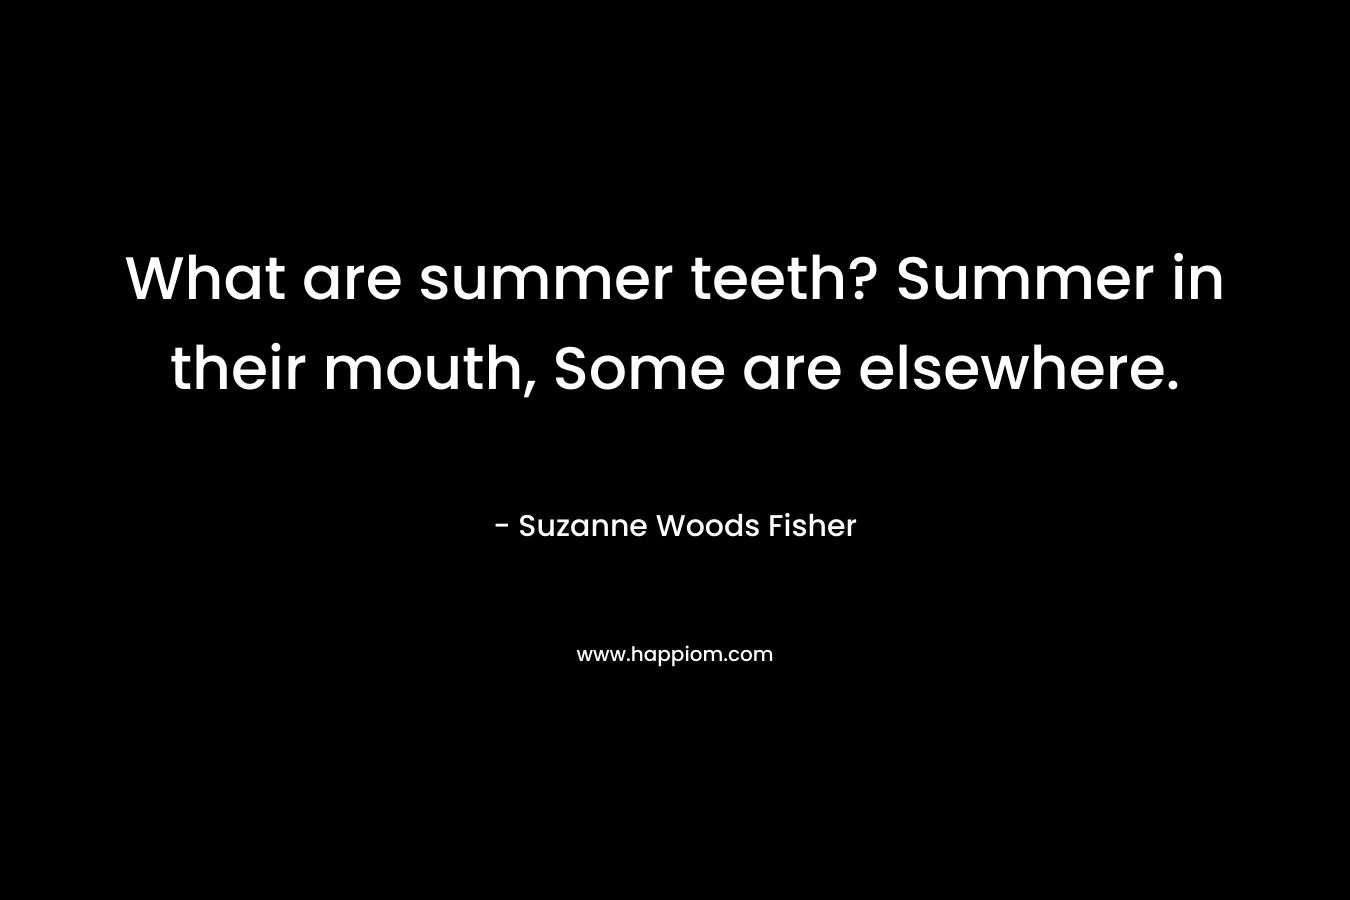 What are summer teeth? Summer in their mouth, Some are elsewhere.